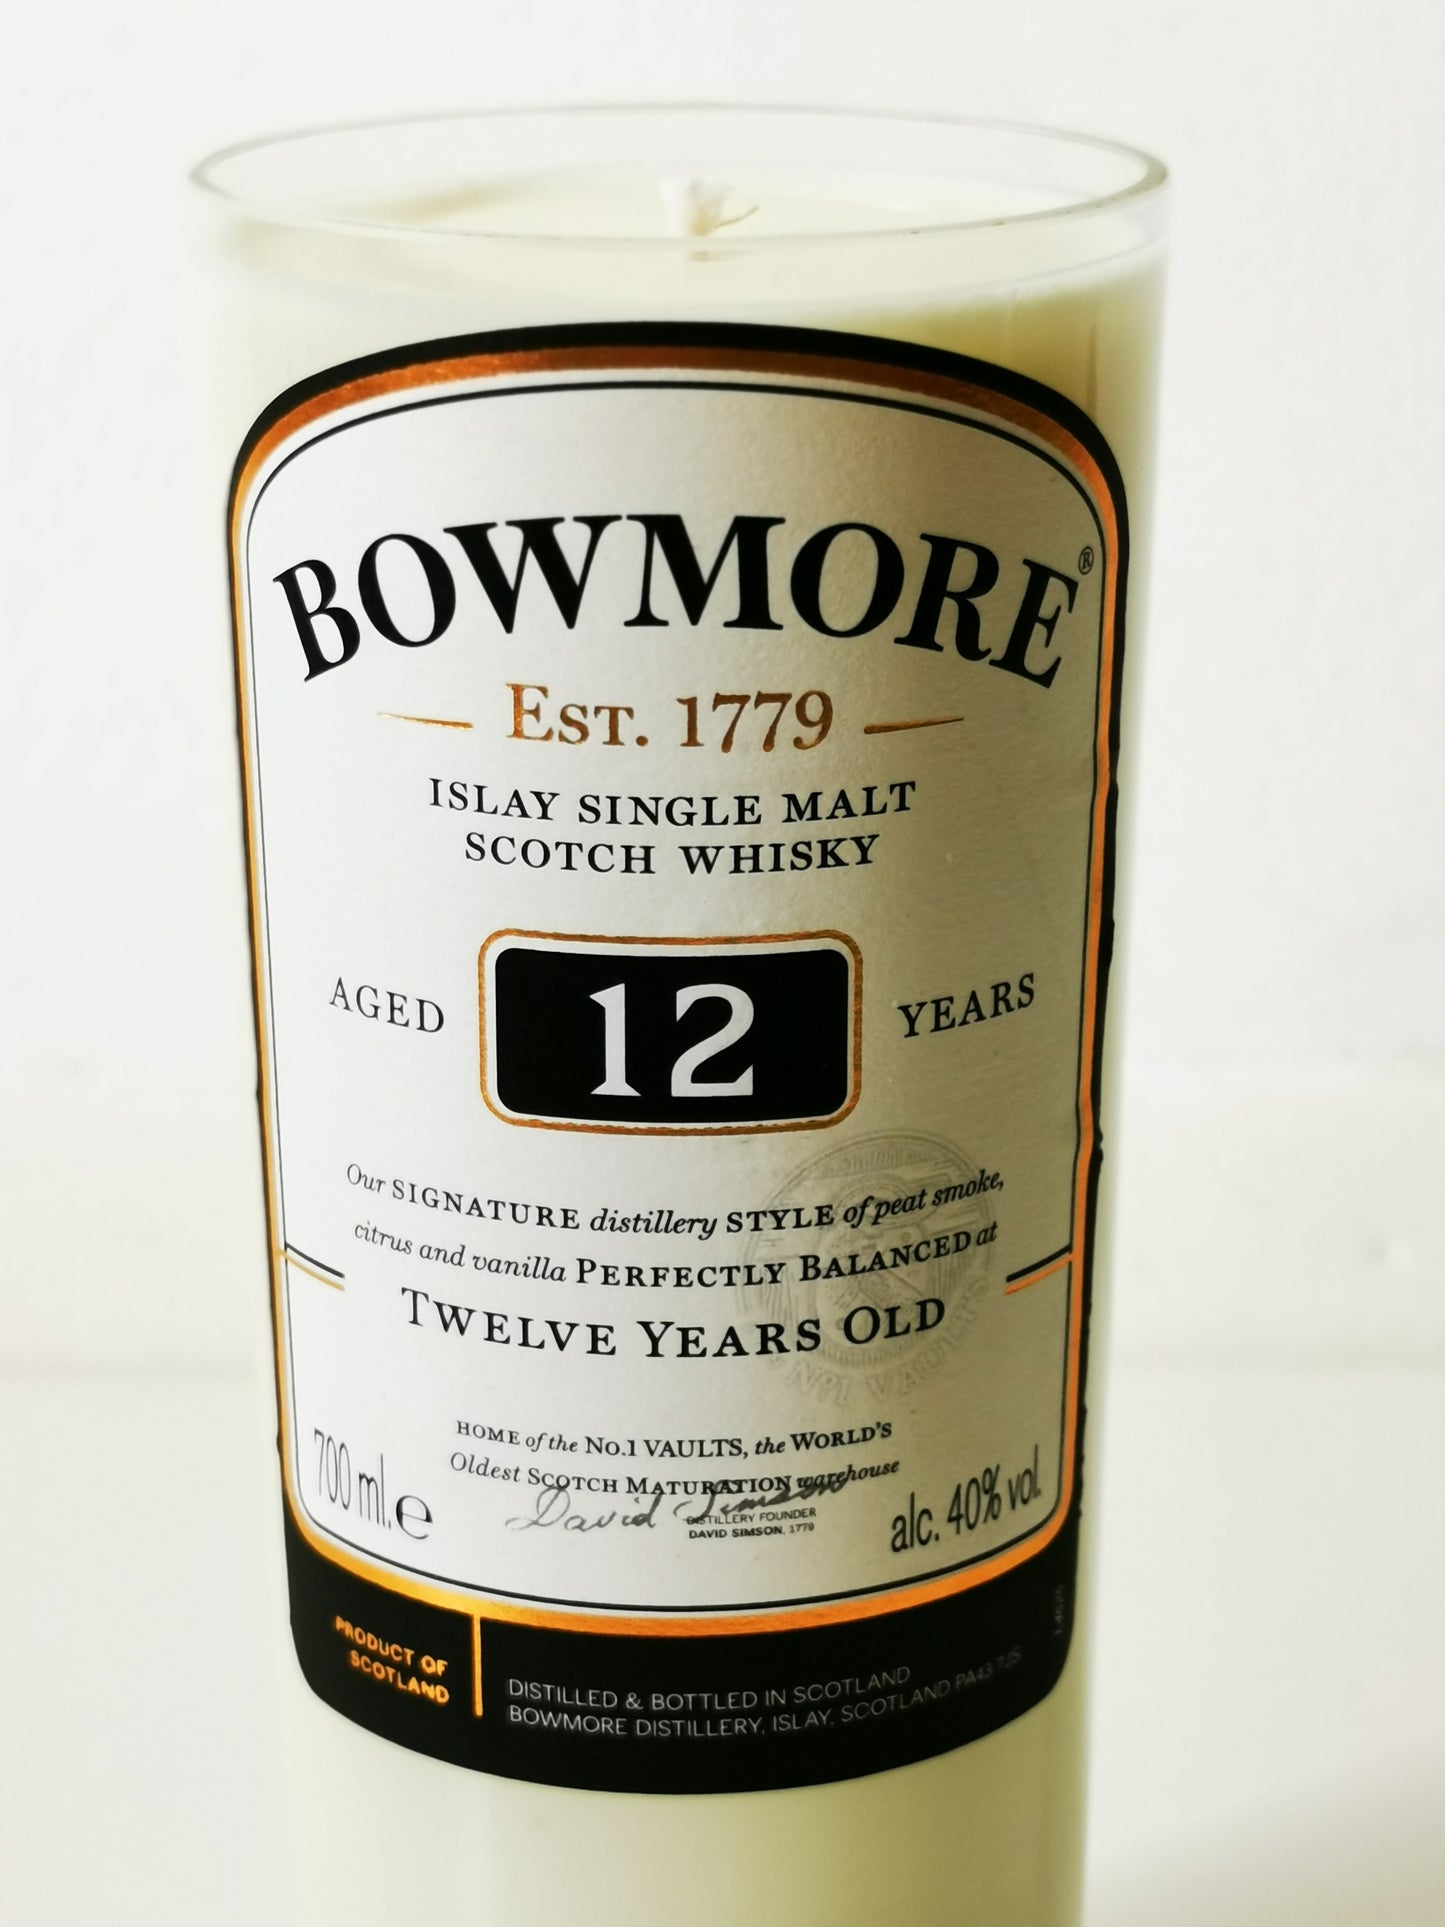 Bowmore 12 Year Old Whisky Bottle Candle Whiskey Bottle Candles Adhock Homeware